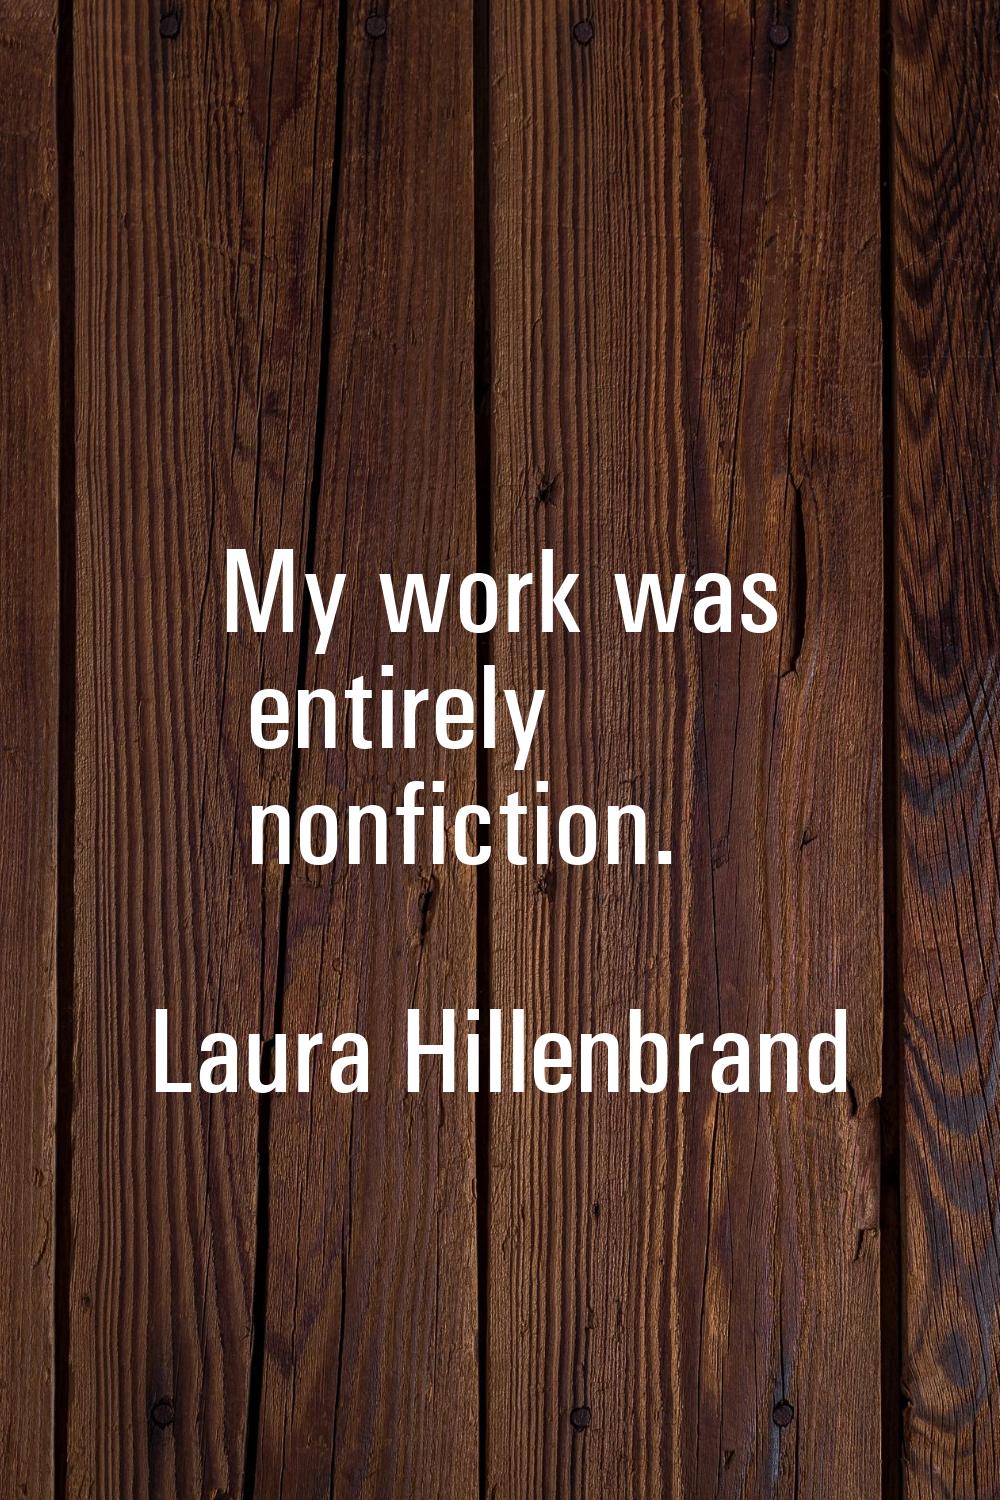 My work was entirely nonfiction.